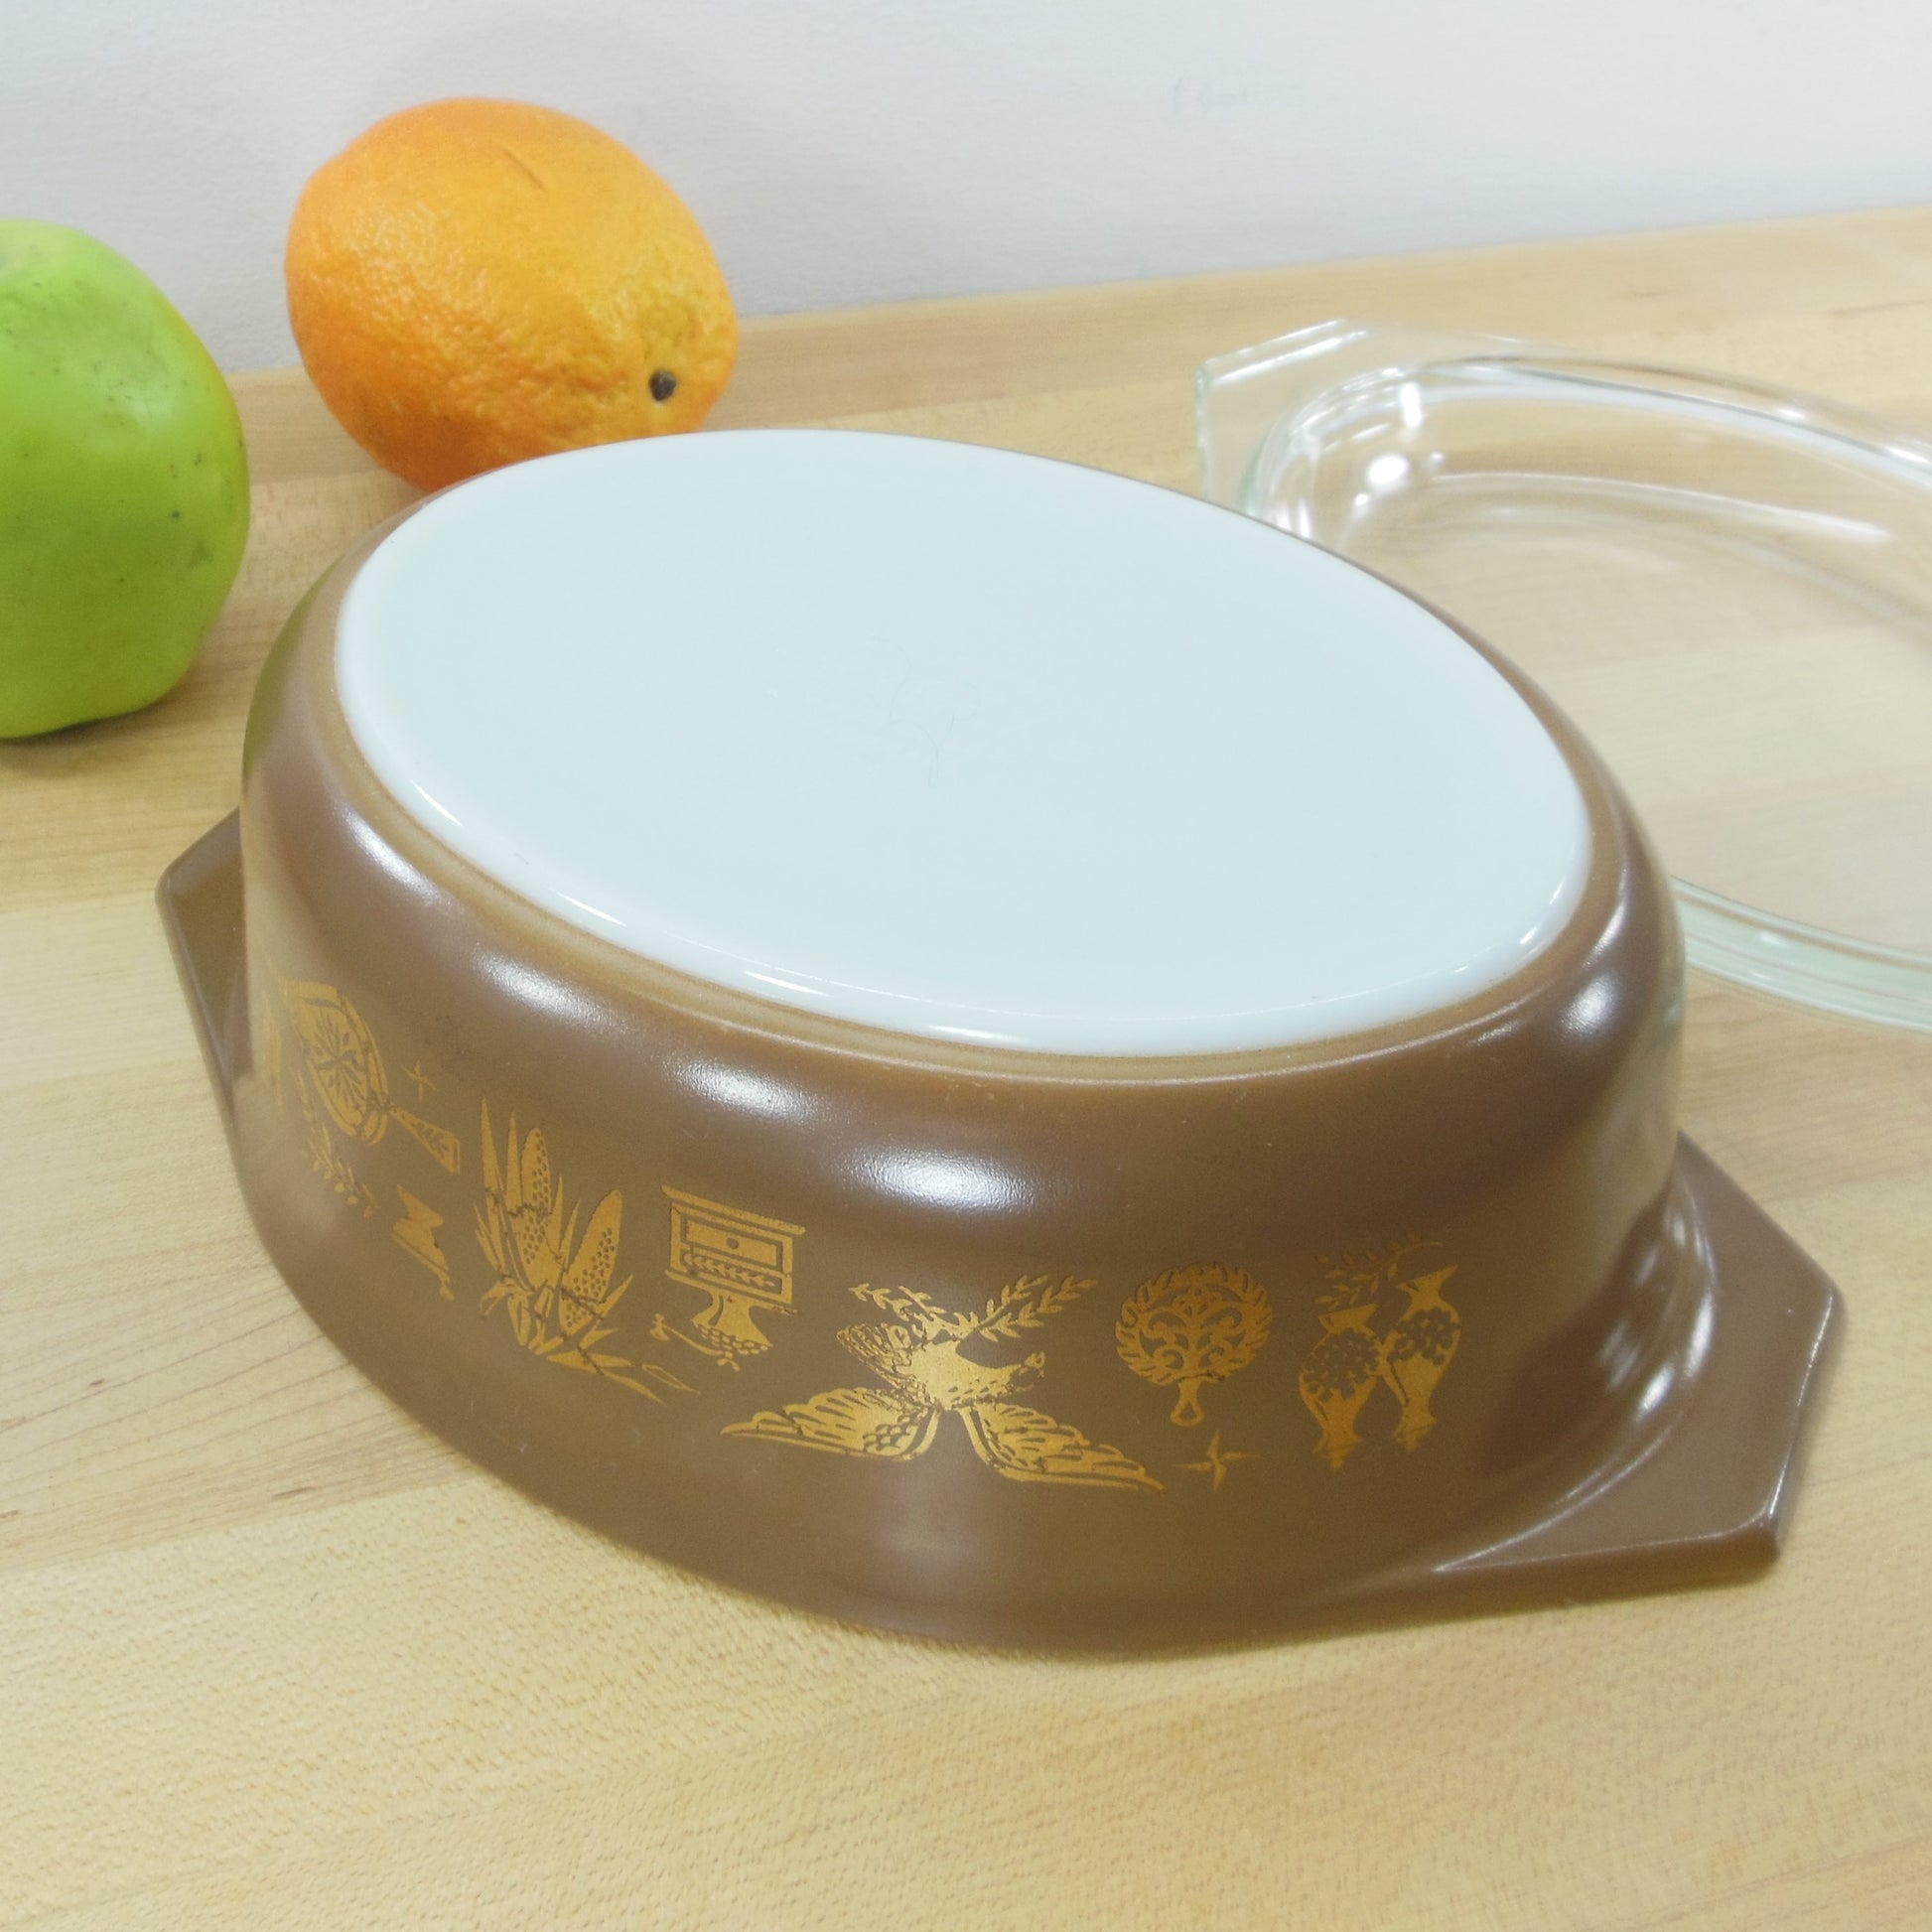 Pyrex Glass Early American 1-1/2 Quart Lidded Casserole Dish 043 Used Brown Gold White